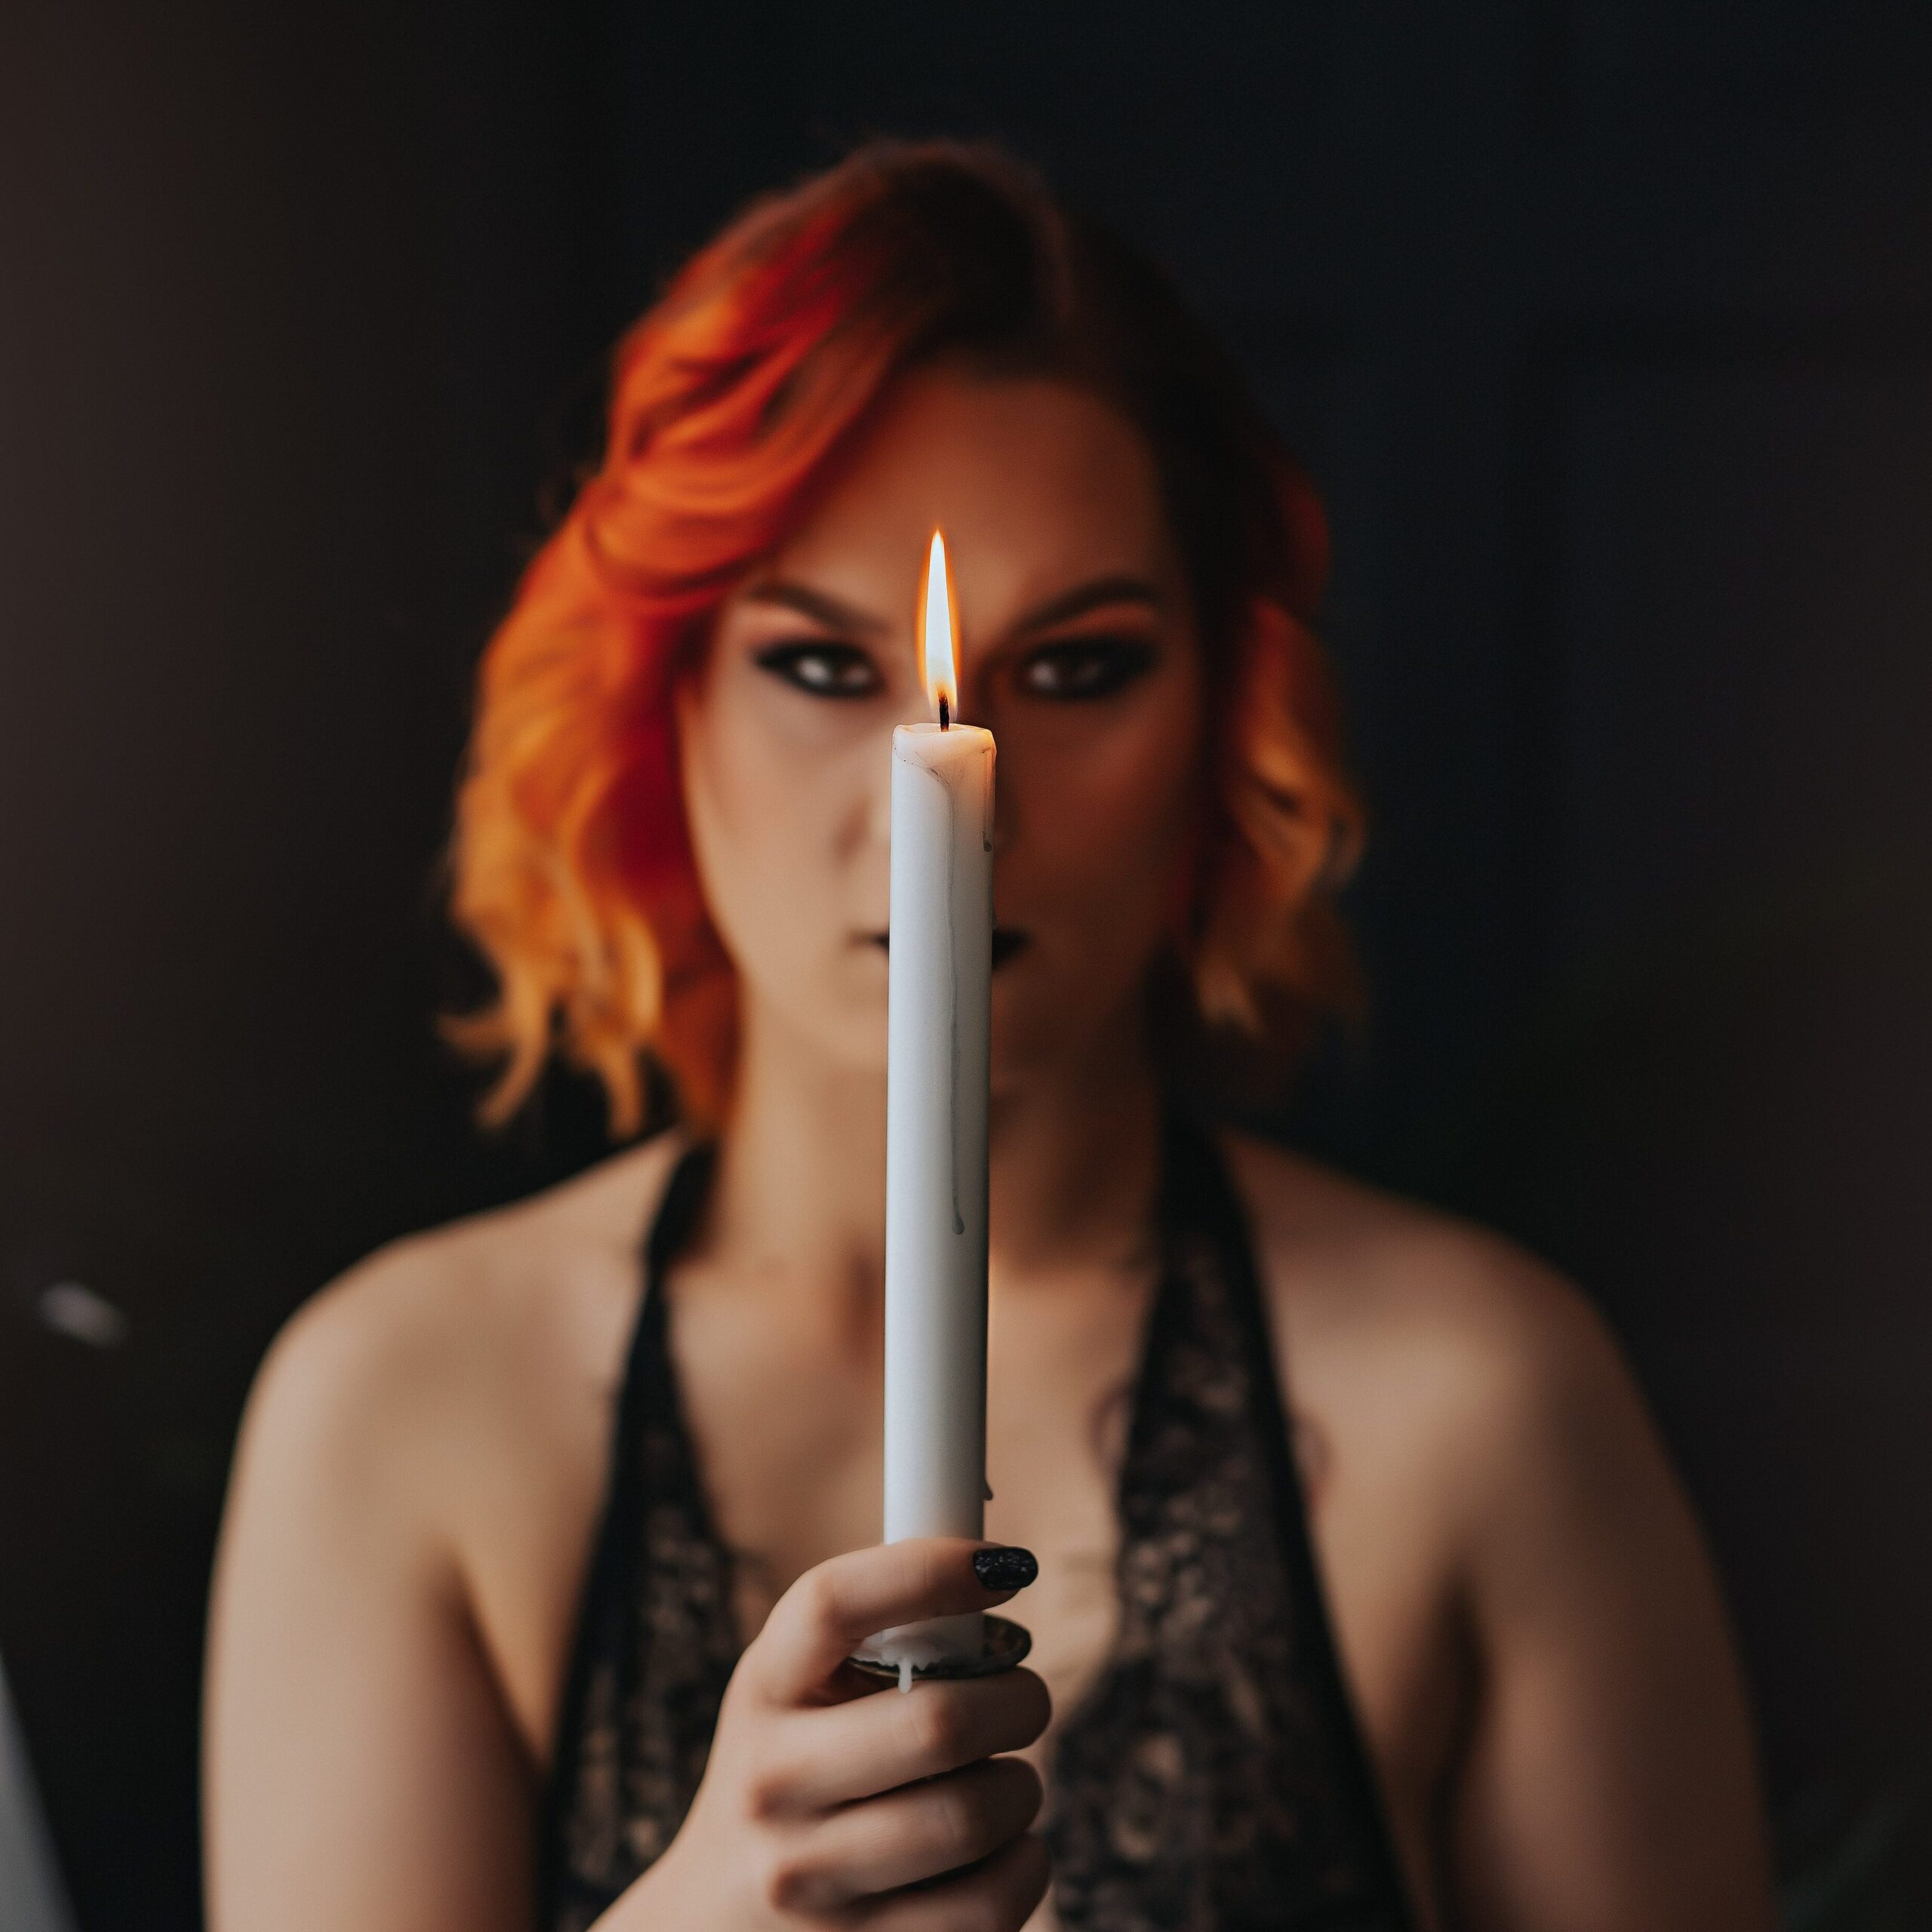 Ms. K (out of focus) holds a candle in a dark and moody photo.